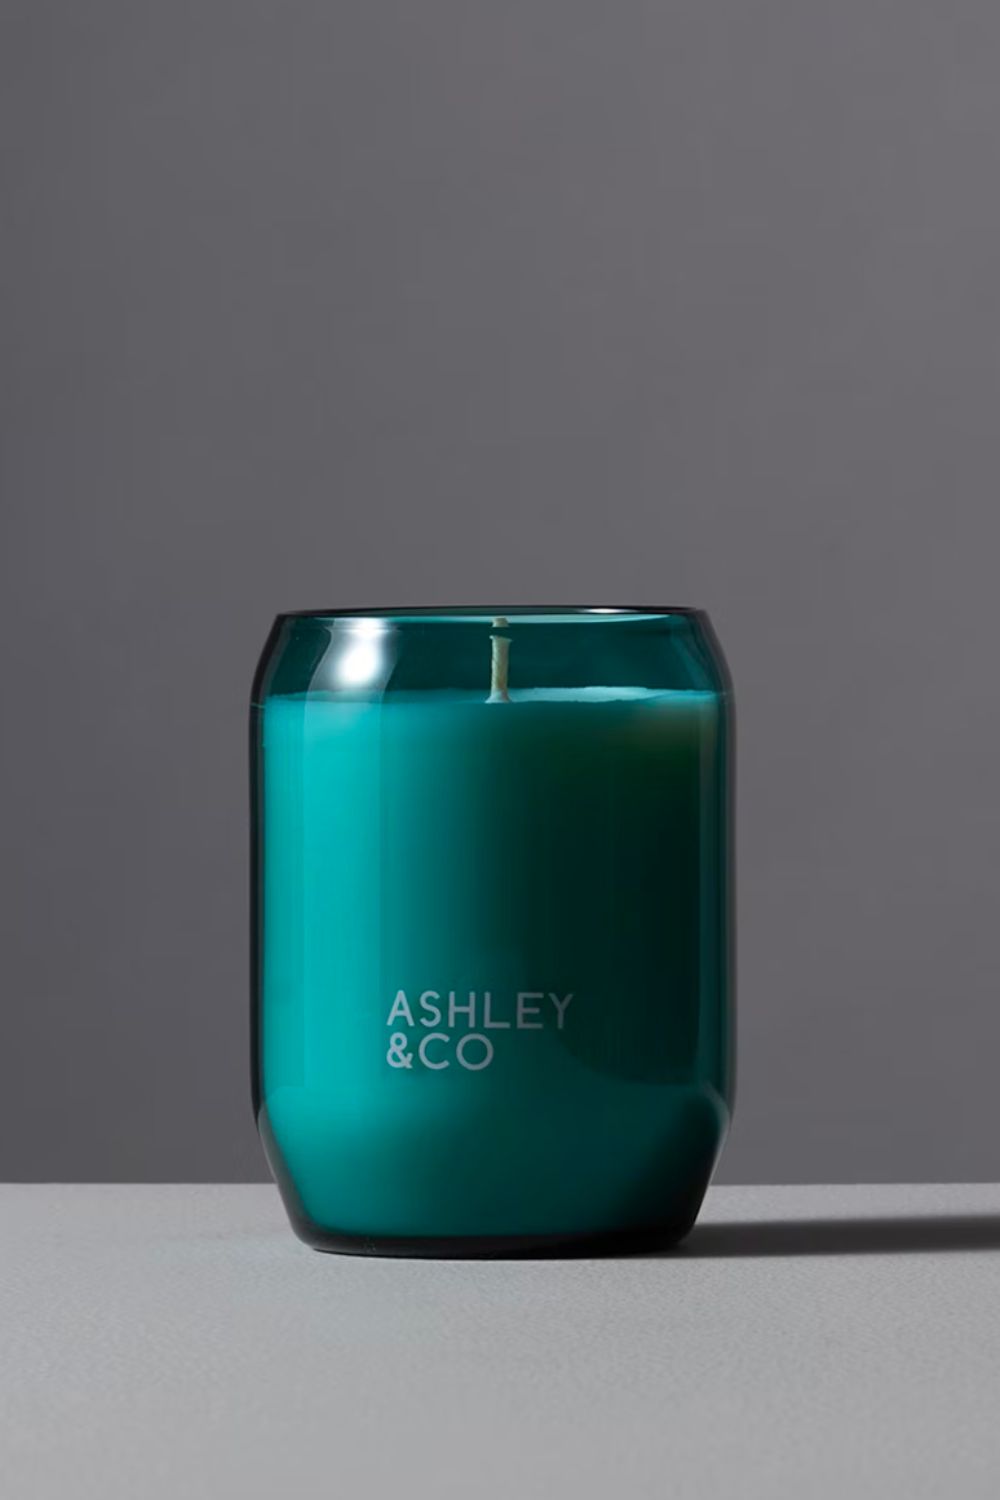 Waxed Perfume - Tui kahili outdoor candle with citronella